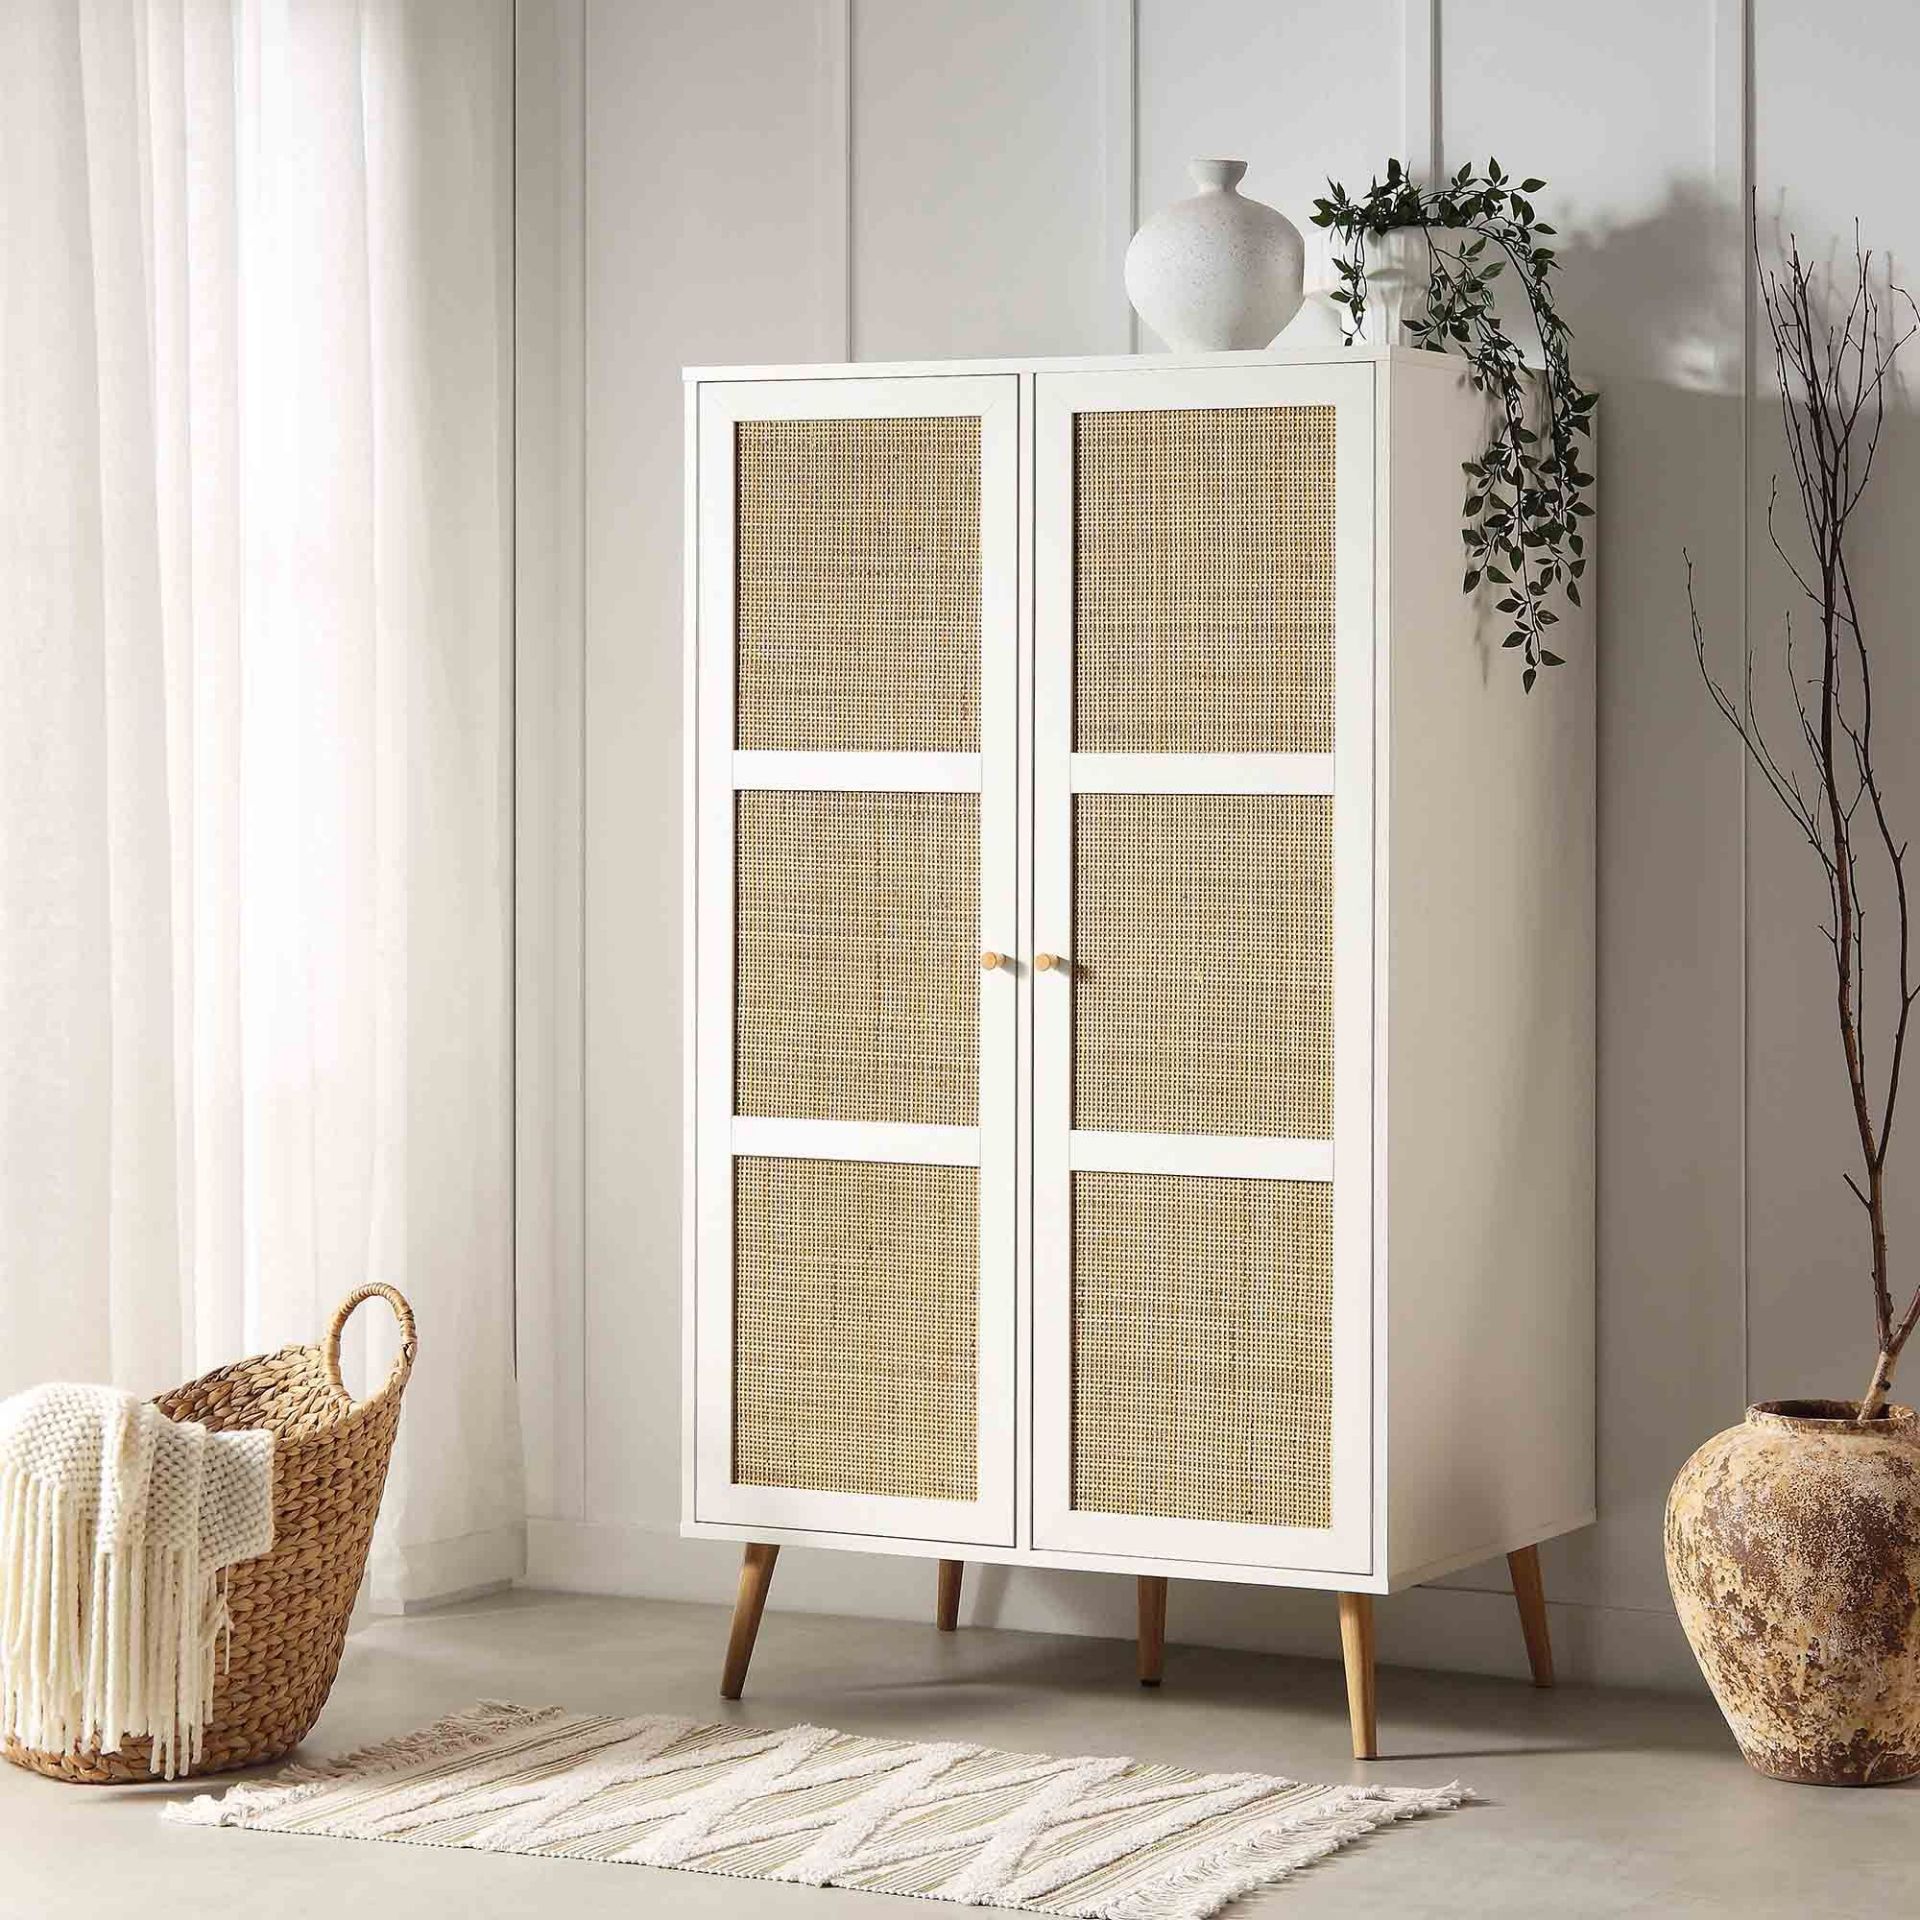 Frances Woven Rattan Compact Double Wardrobe, White. - R14. RRP £399.99. Crafted from wood and